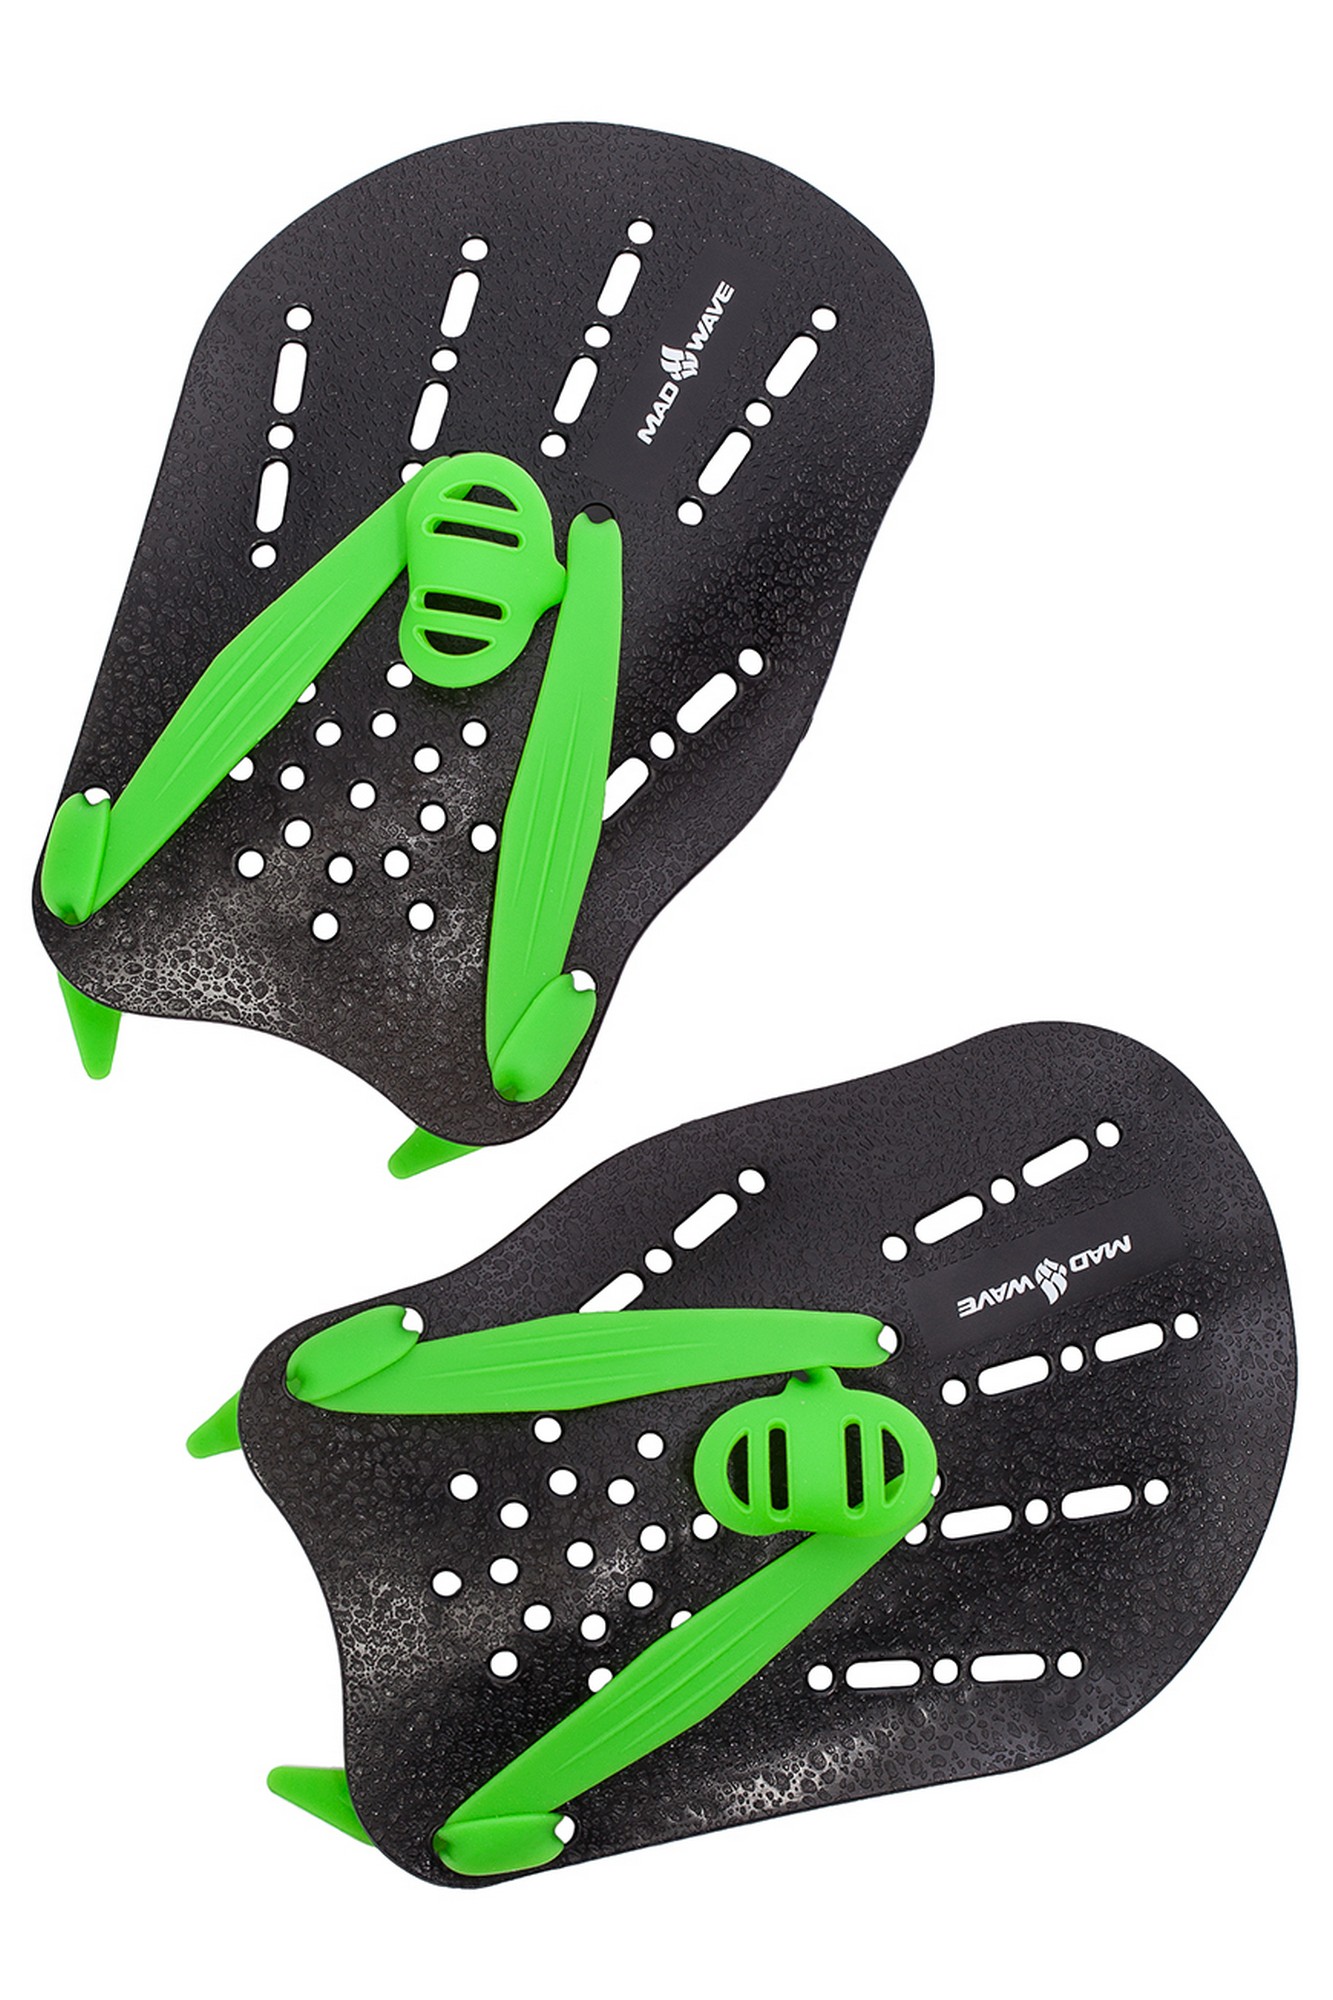  Mad Wave Mad Wave Paddles M0749 06 2 00W